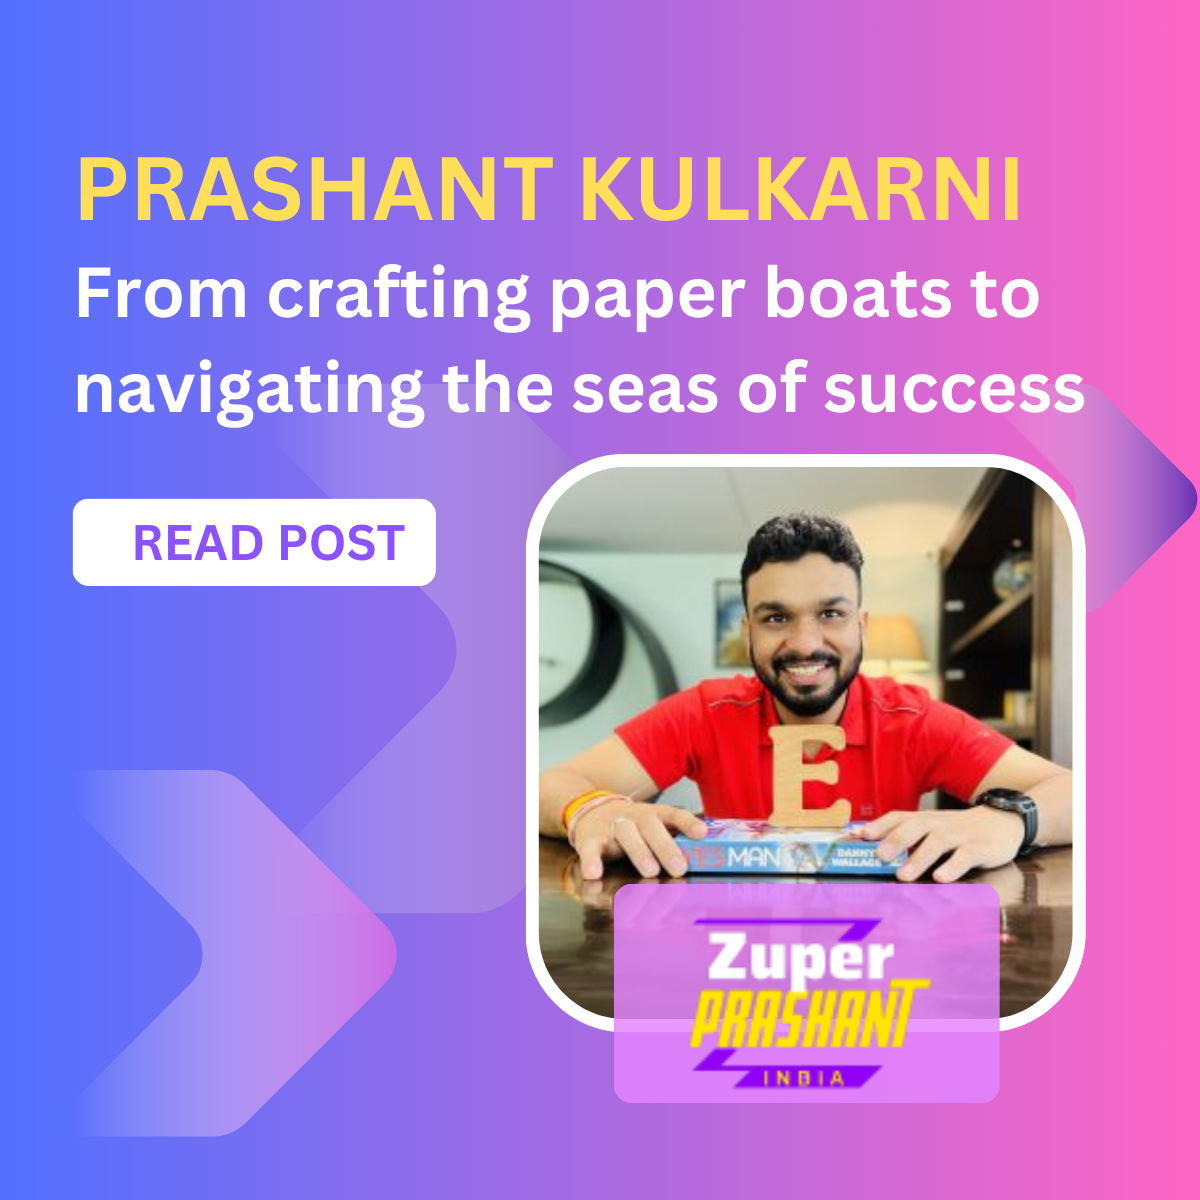 From crafting paper boats to navigating the seas of success